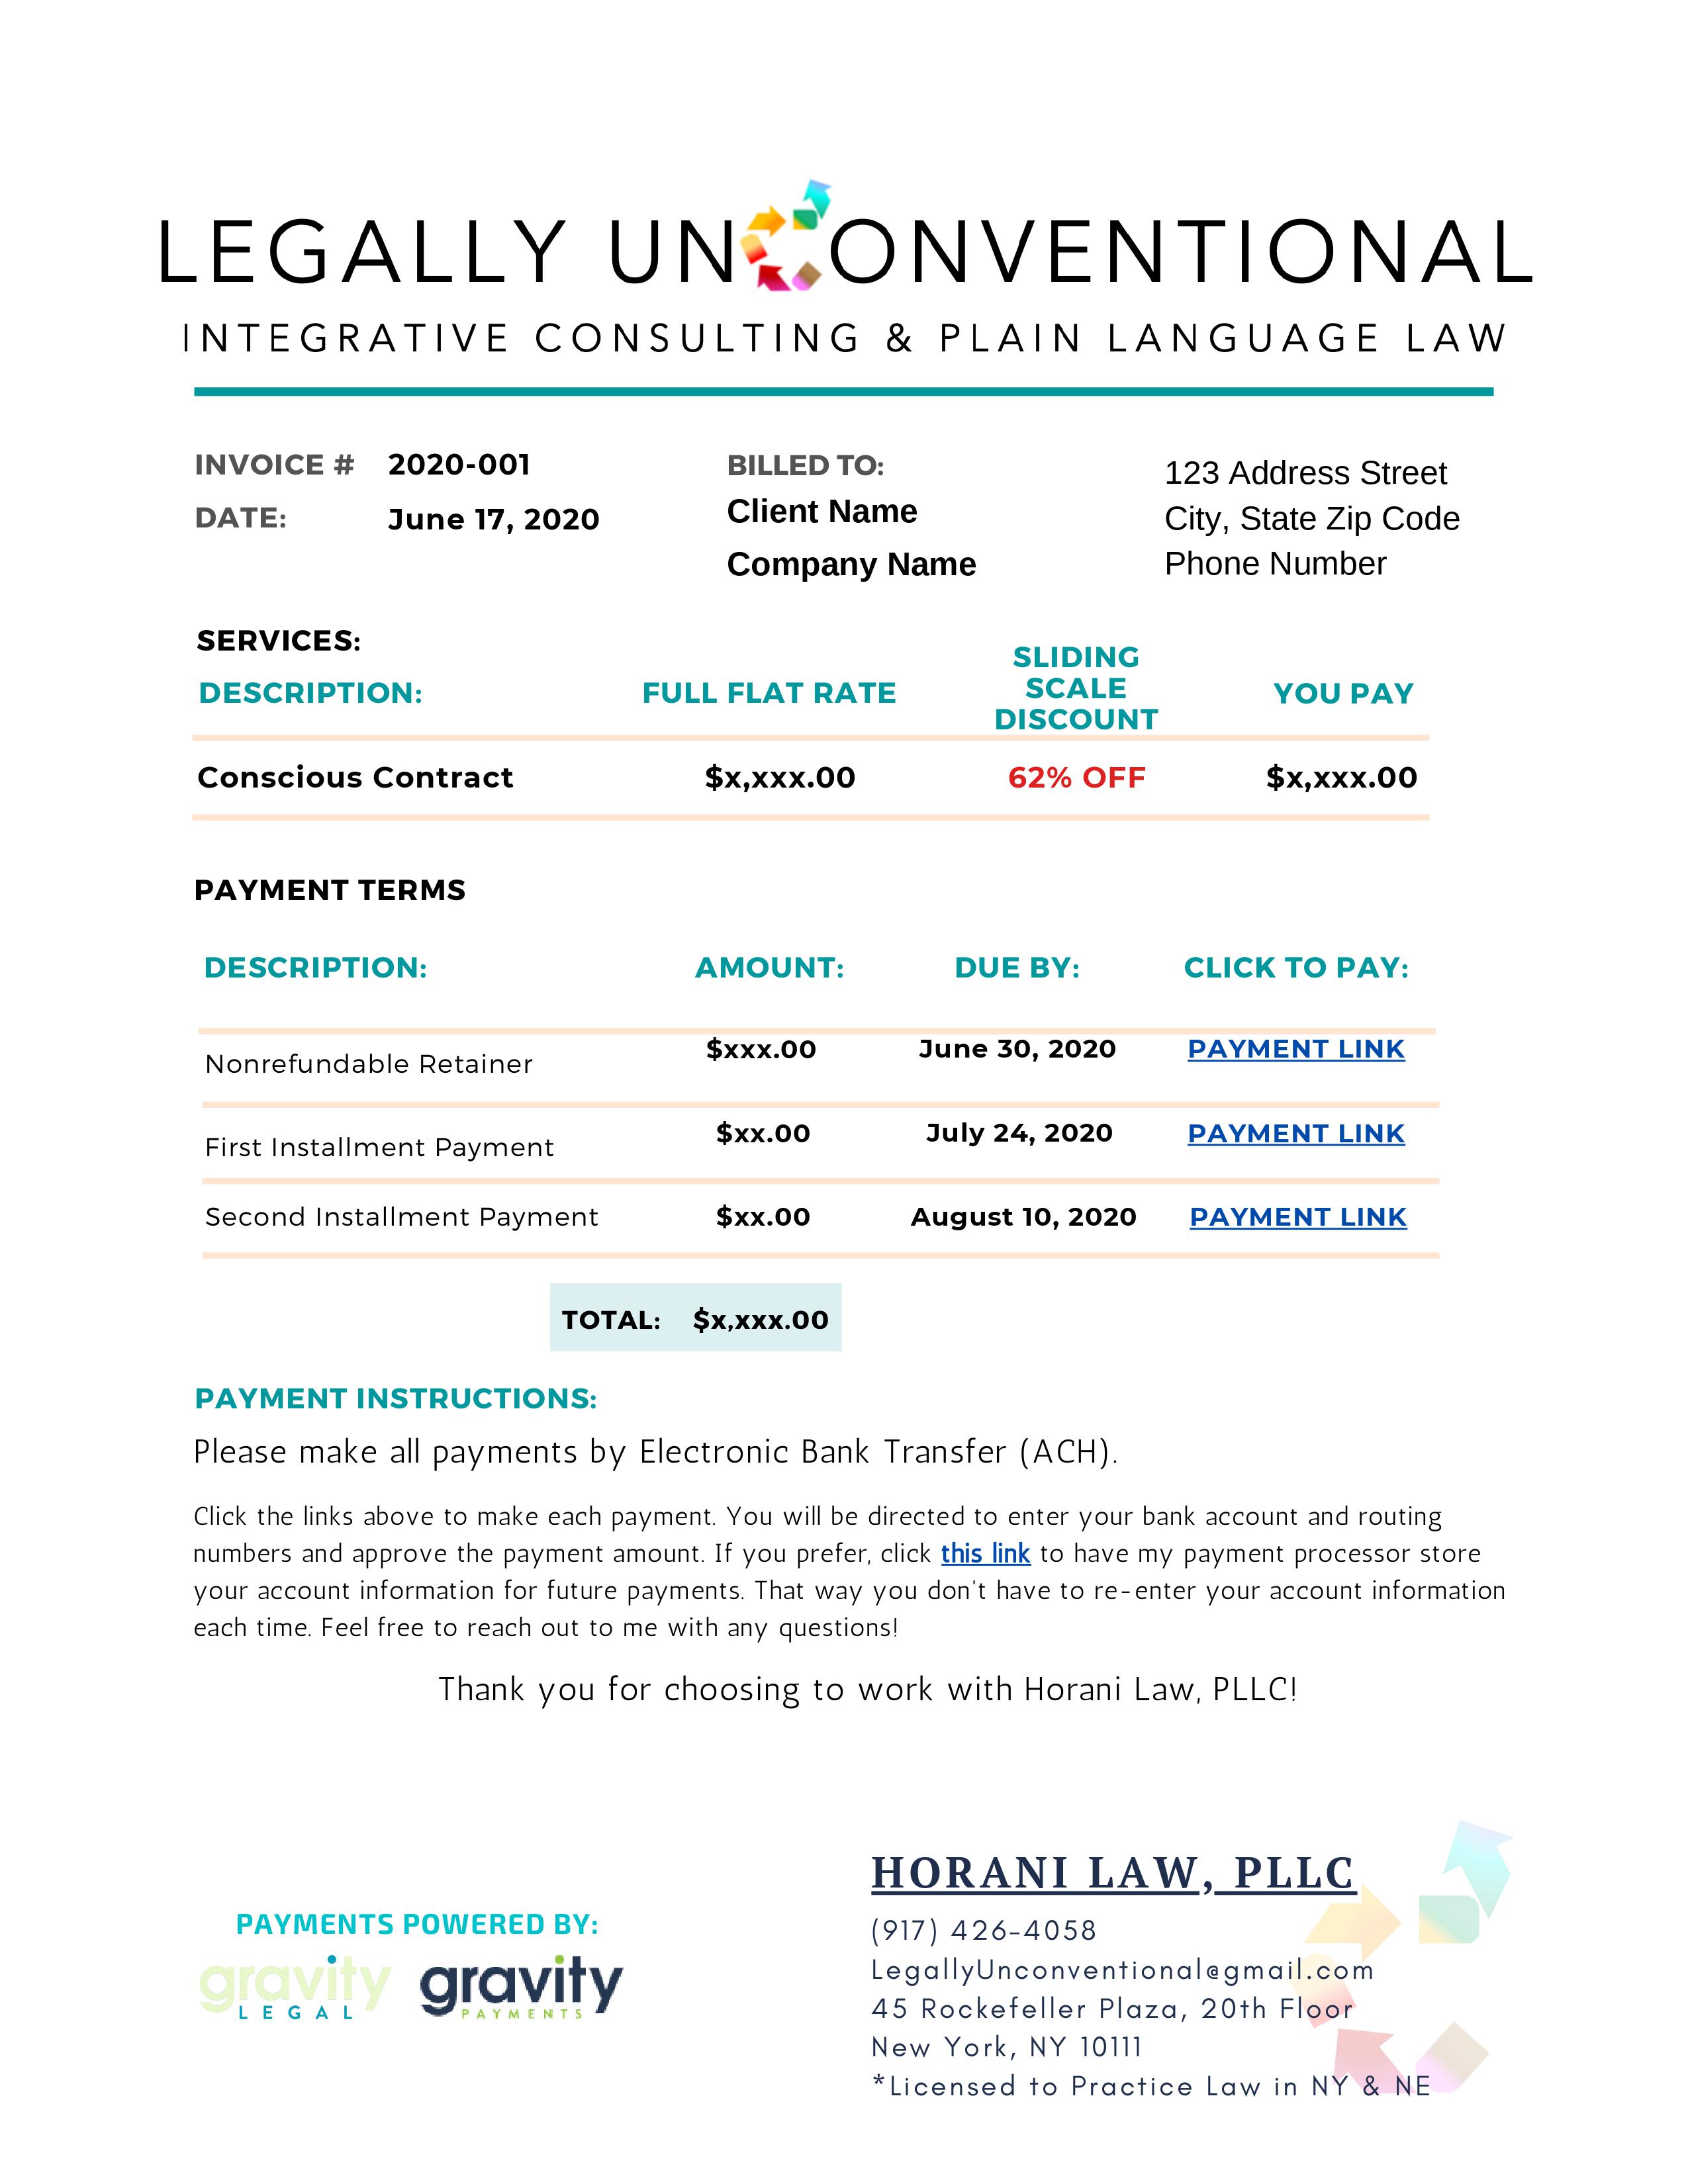 Legally Unconventional Invoice